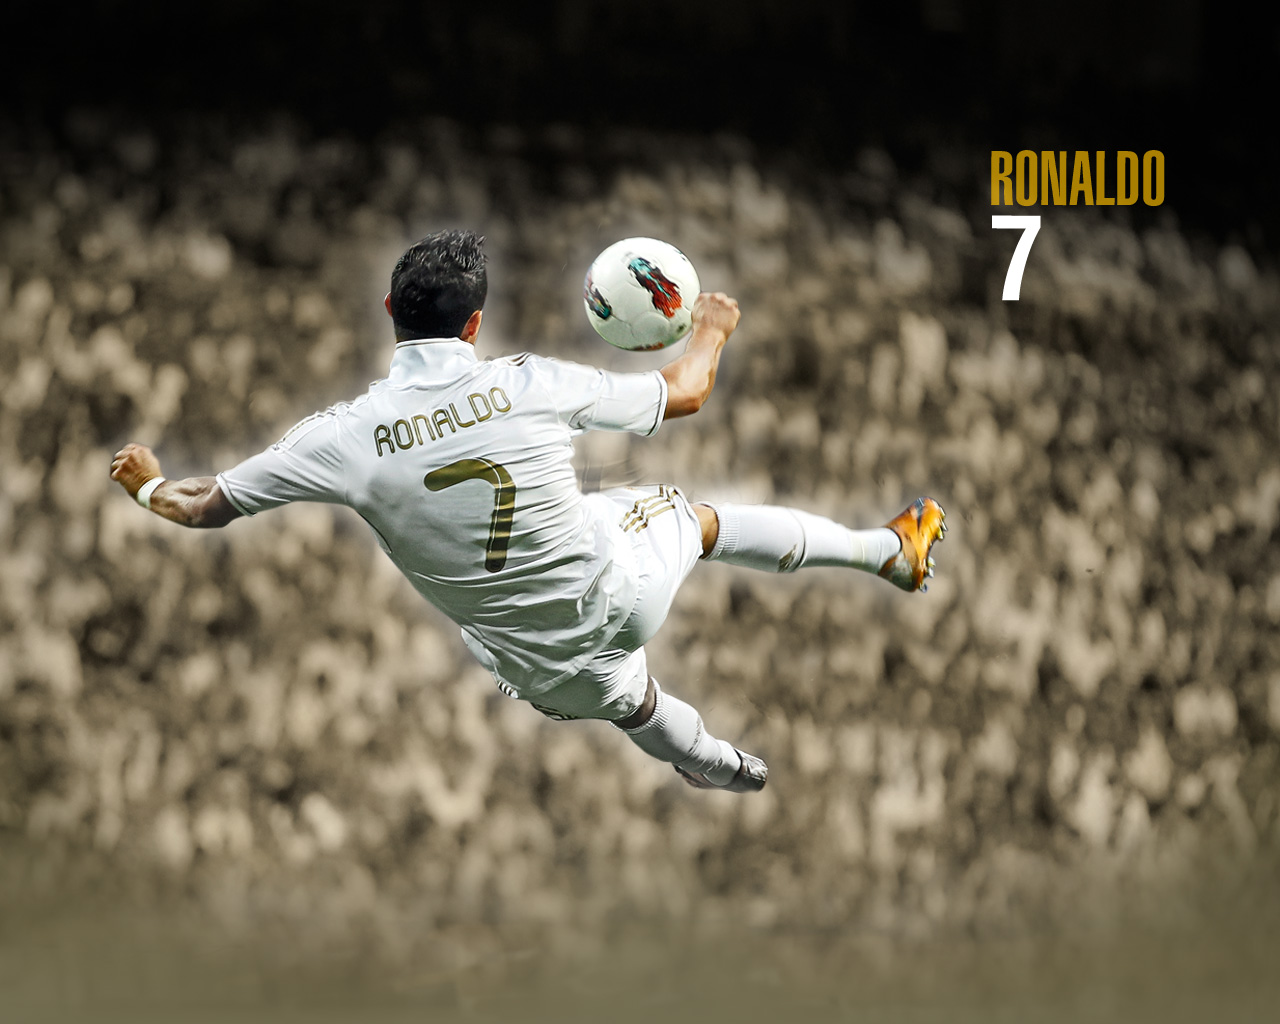 ALL SPORTS PLAYERS: Cristiano Ronaldo hd Wallpapers 2013